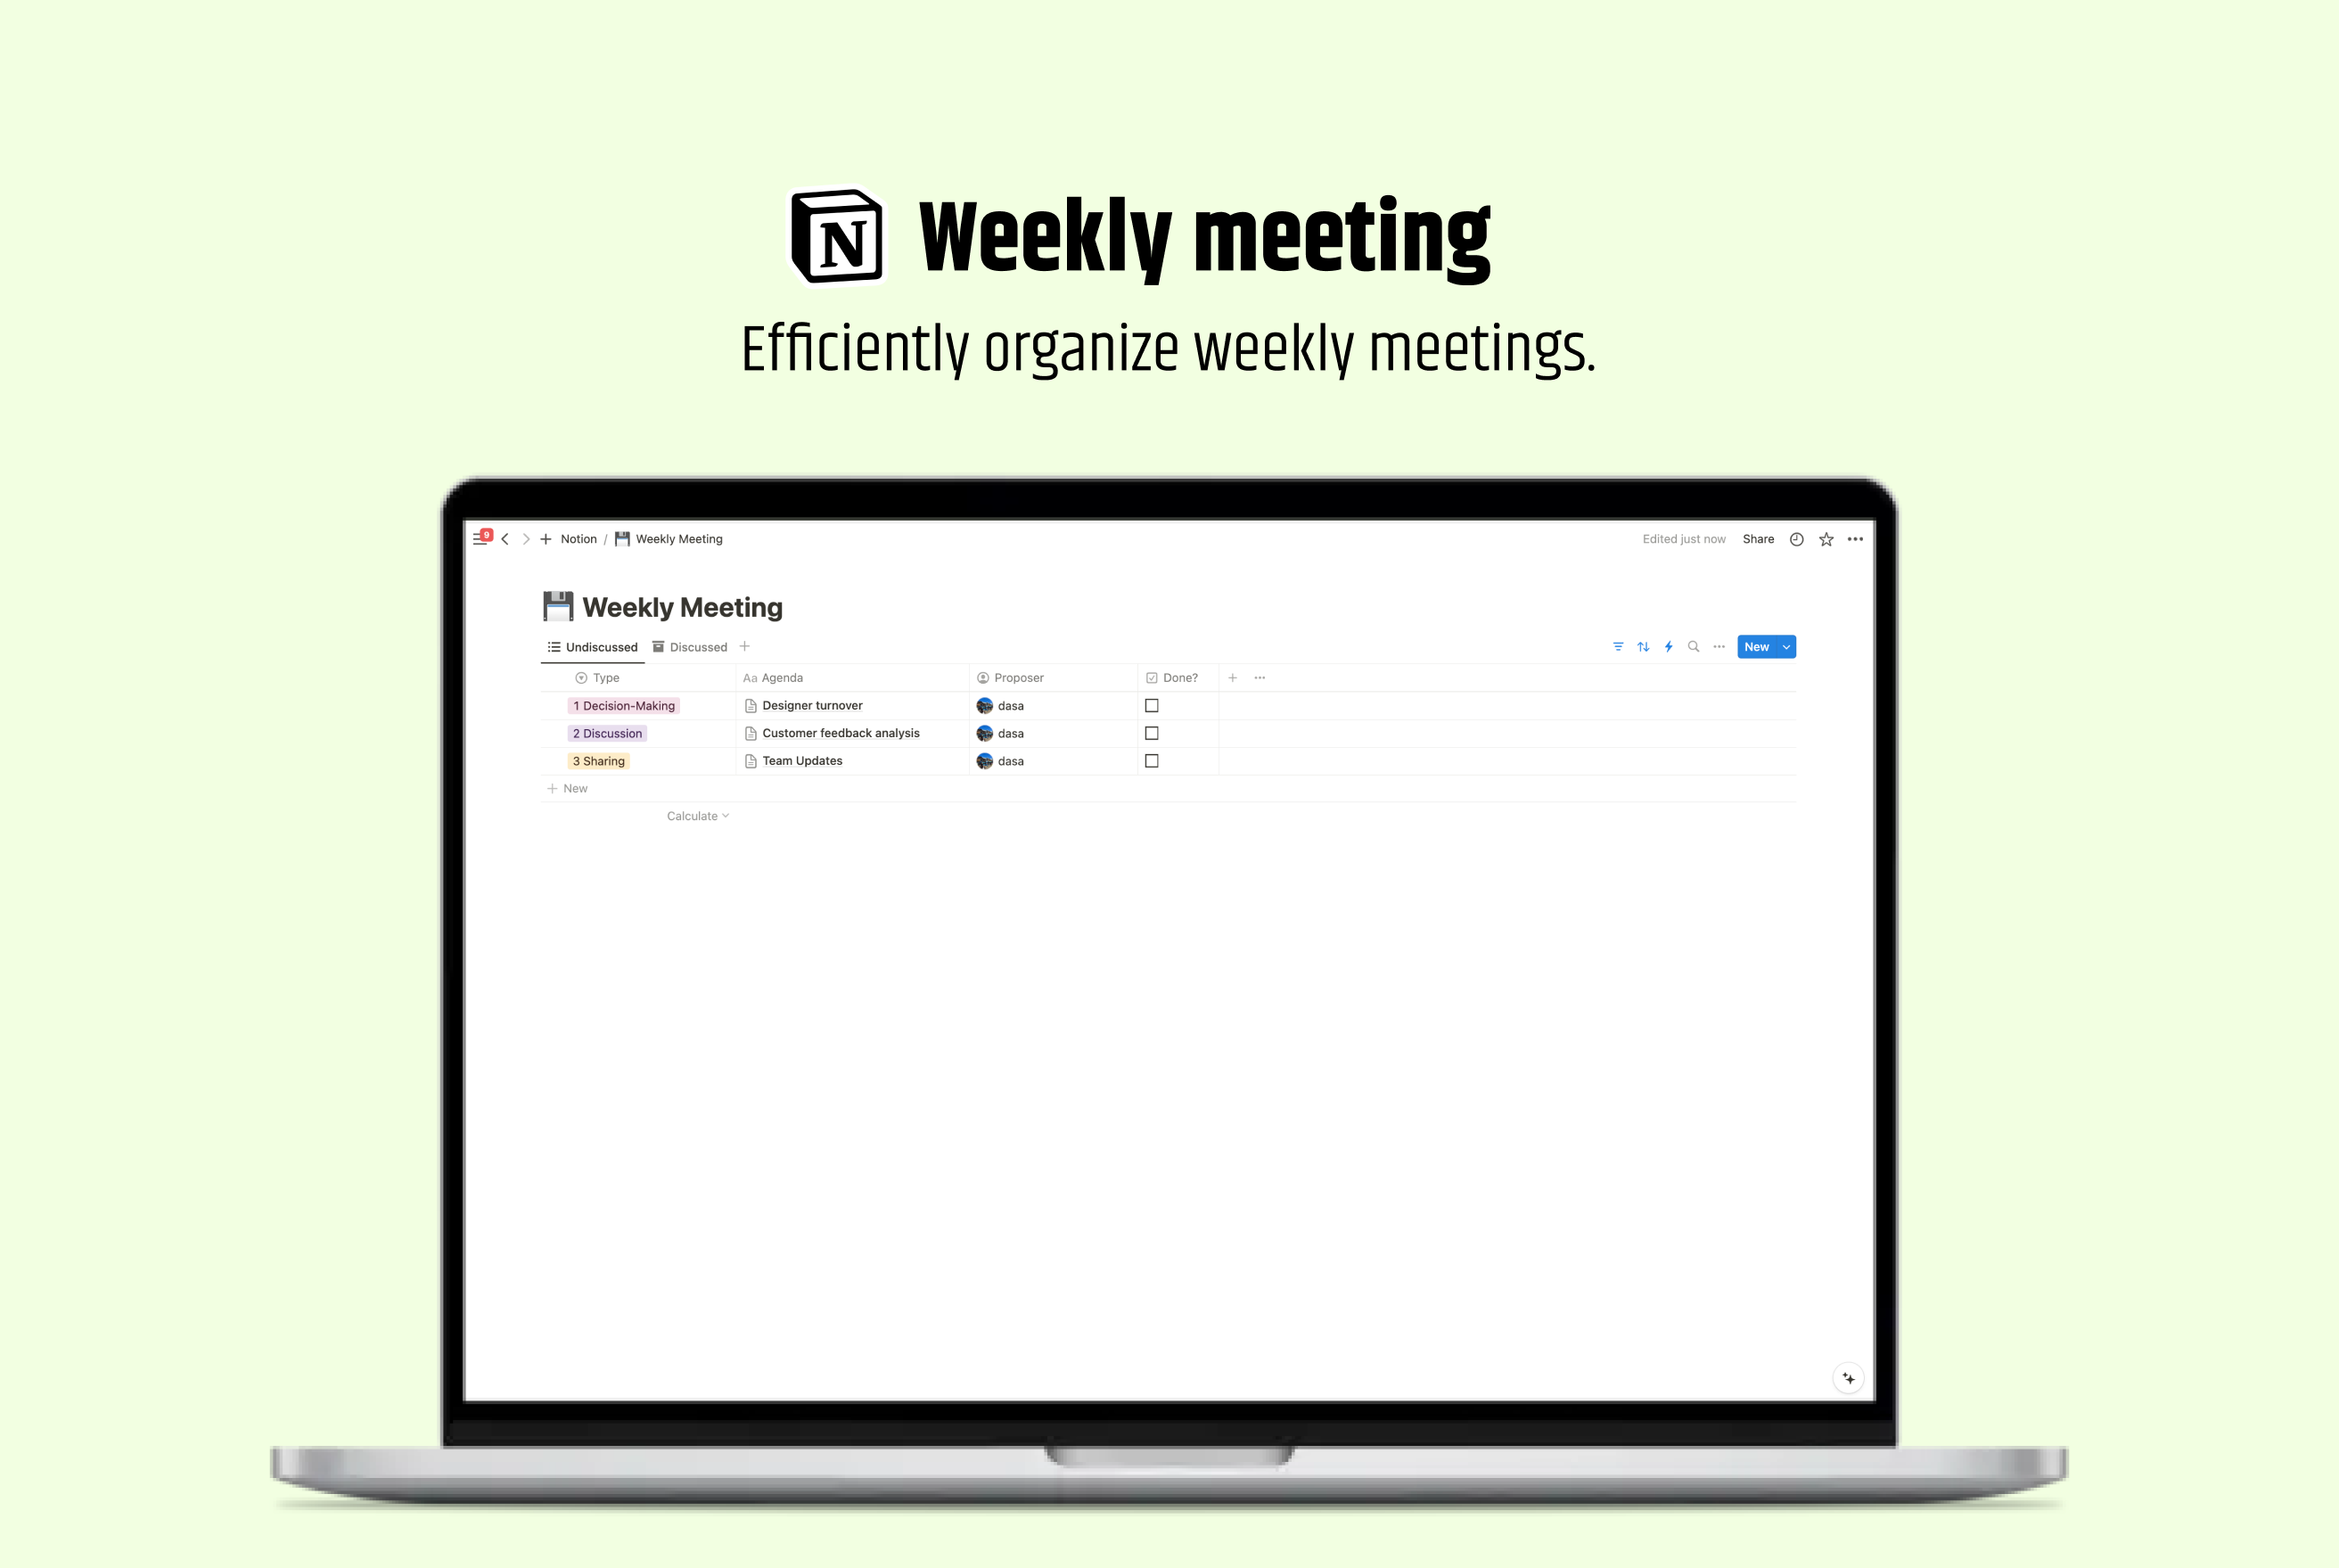 This template is designed for weekly meetings. It allows you to easily prepare agendas and efficiently organize weekly meetings. You can quickly grasp and manage previously discussed agendas at a glance.